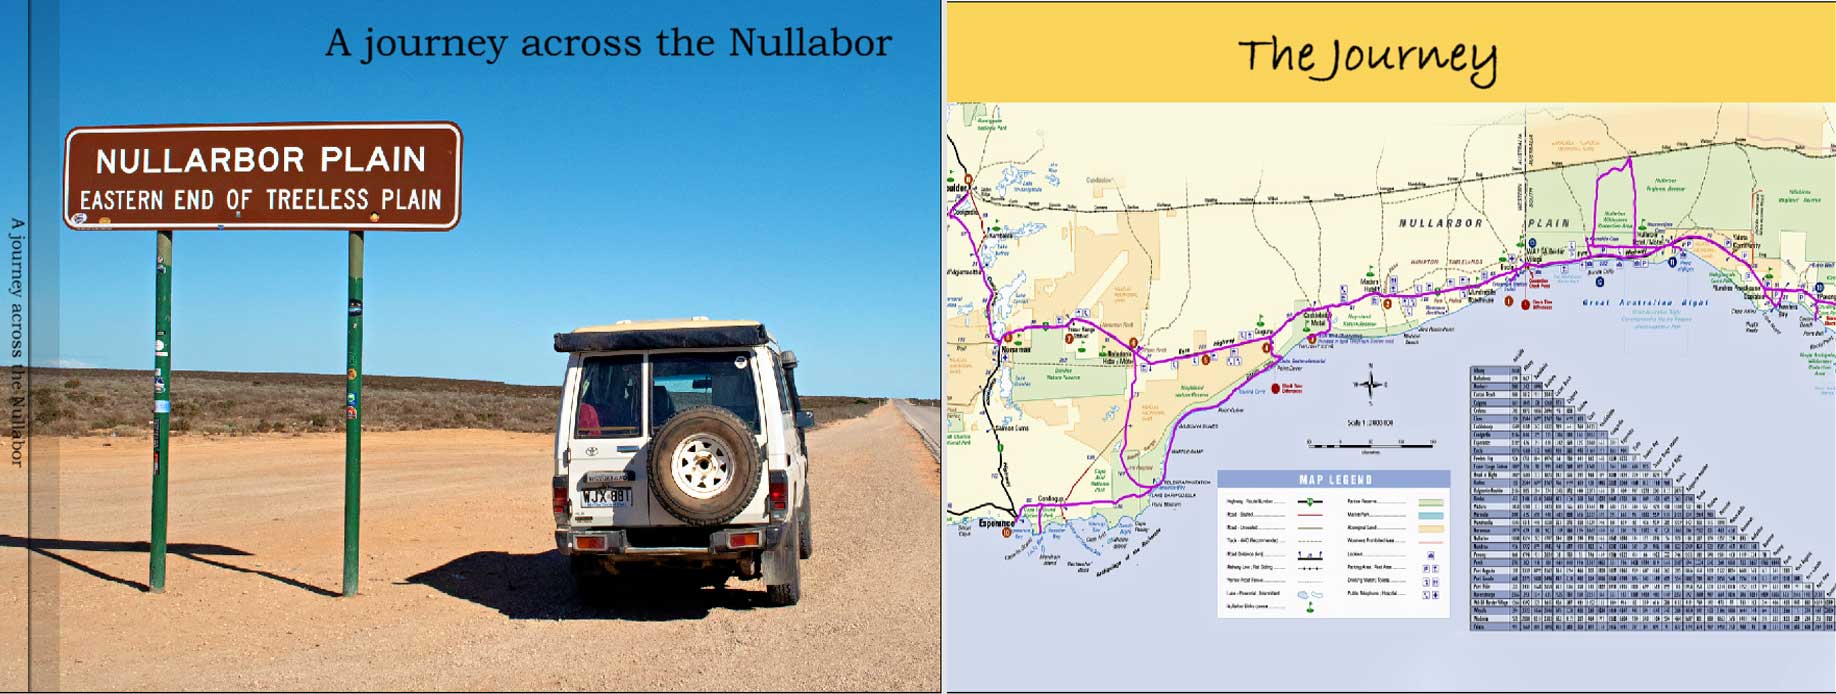  The Nullabor